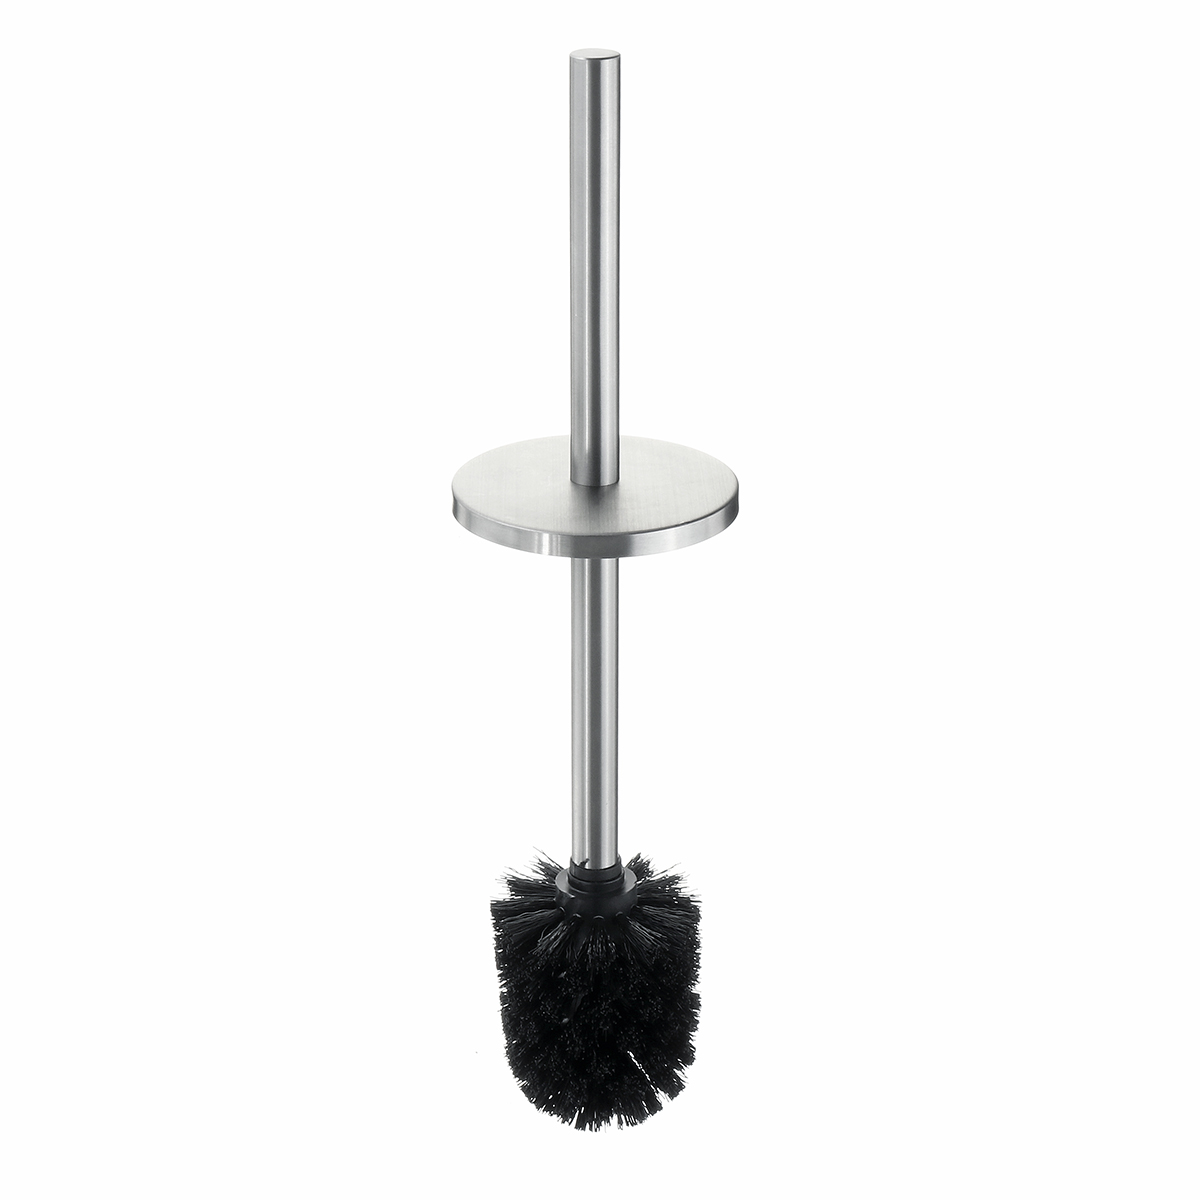 Toilet-Cleaning-Brushes-Wall-mounted-Stainless-Steel-Handle-Toilet-Bathroom-Easy-install-1600807-5